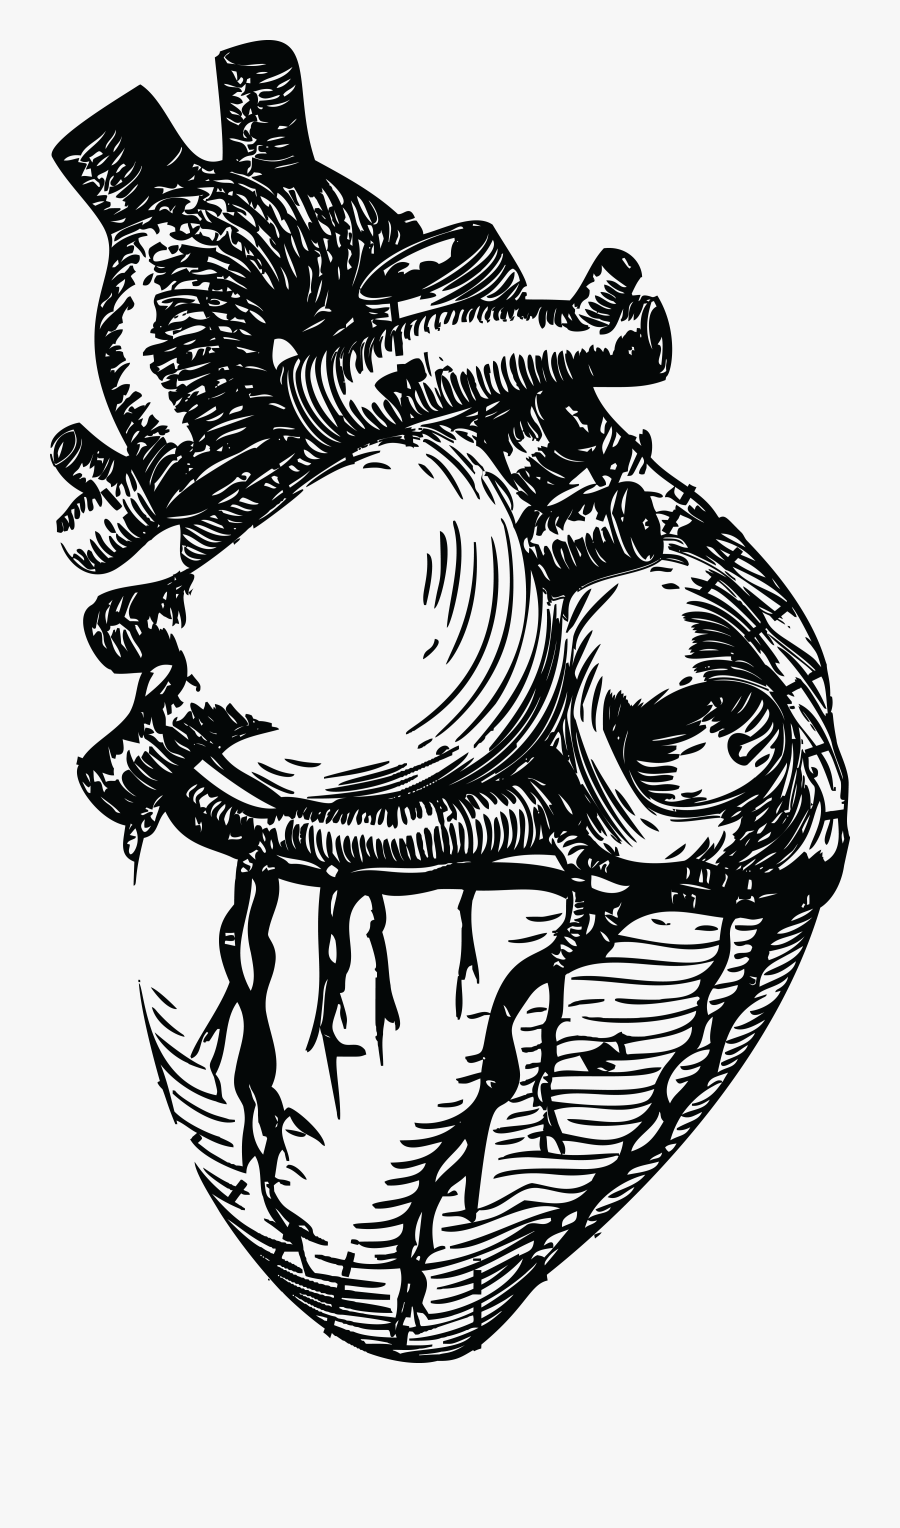 Free Clipart Of A Human Heart In Black And White - Human Heart Clipart Black And White, Transparent Clipart